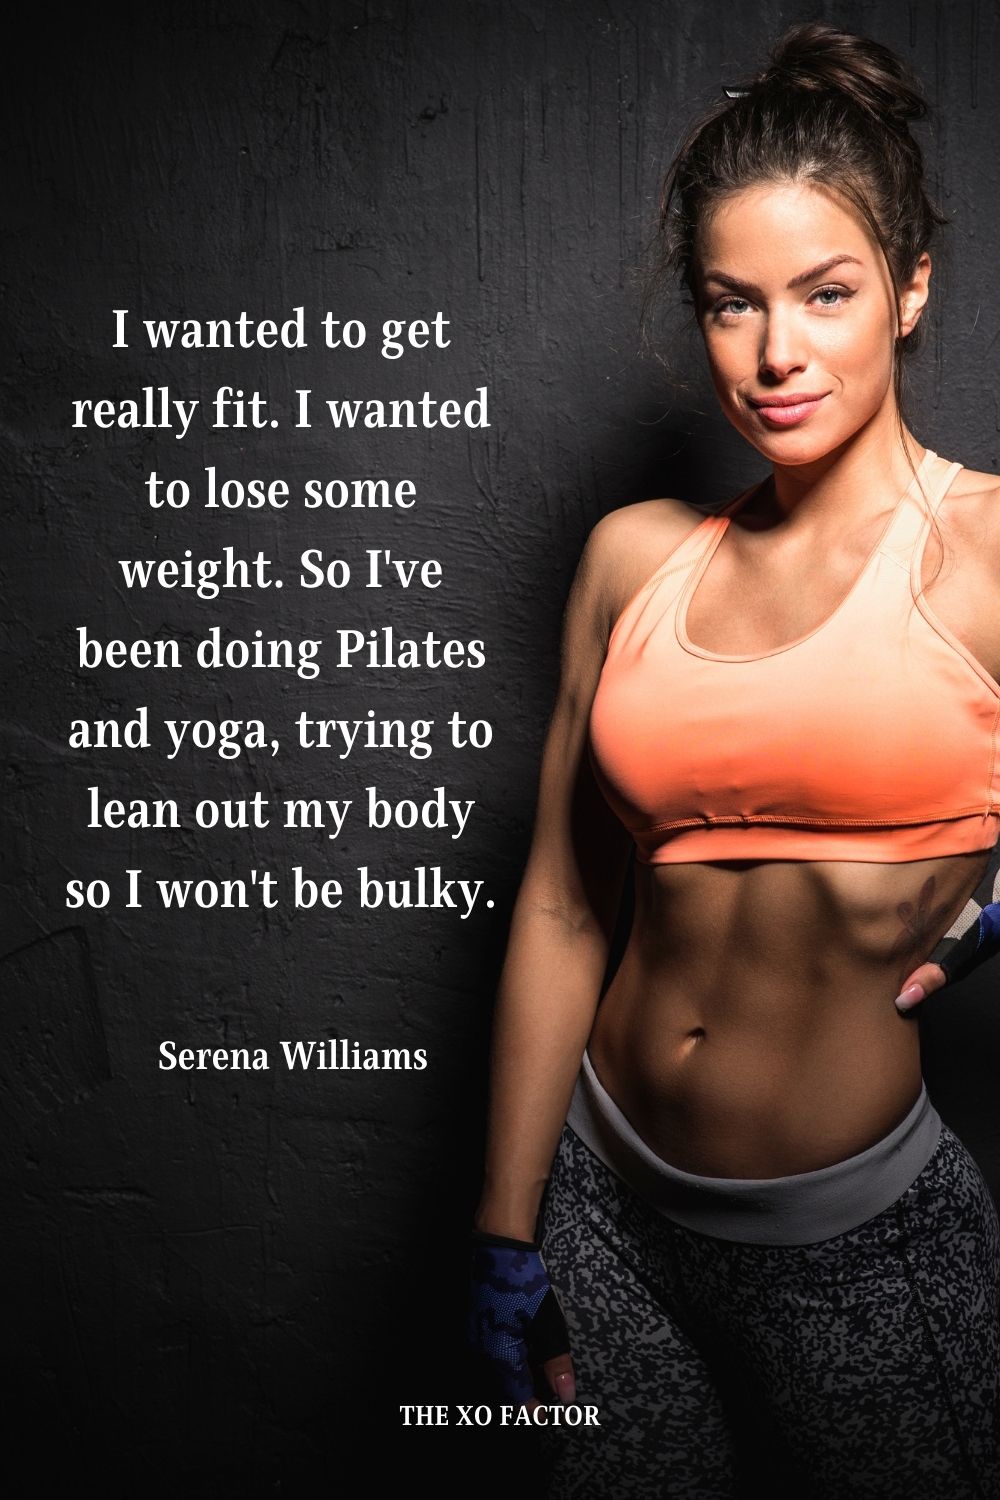 I wanted to get really fit. I wanted to lose some weight. So I've been doing Pilates and yoga, trying to lean out my body so I won't be bulky. Serena Williams